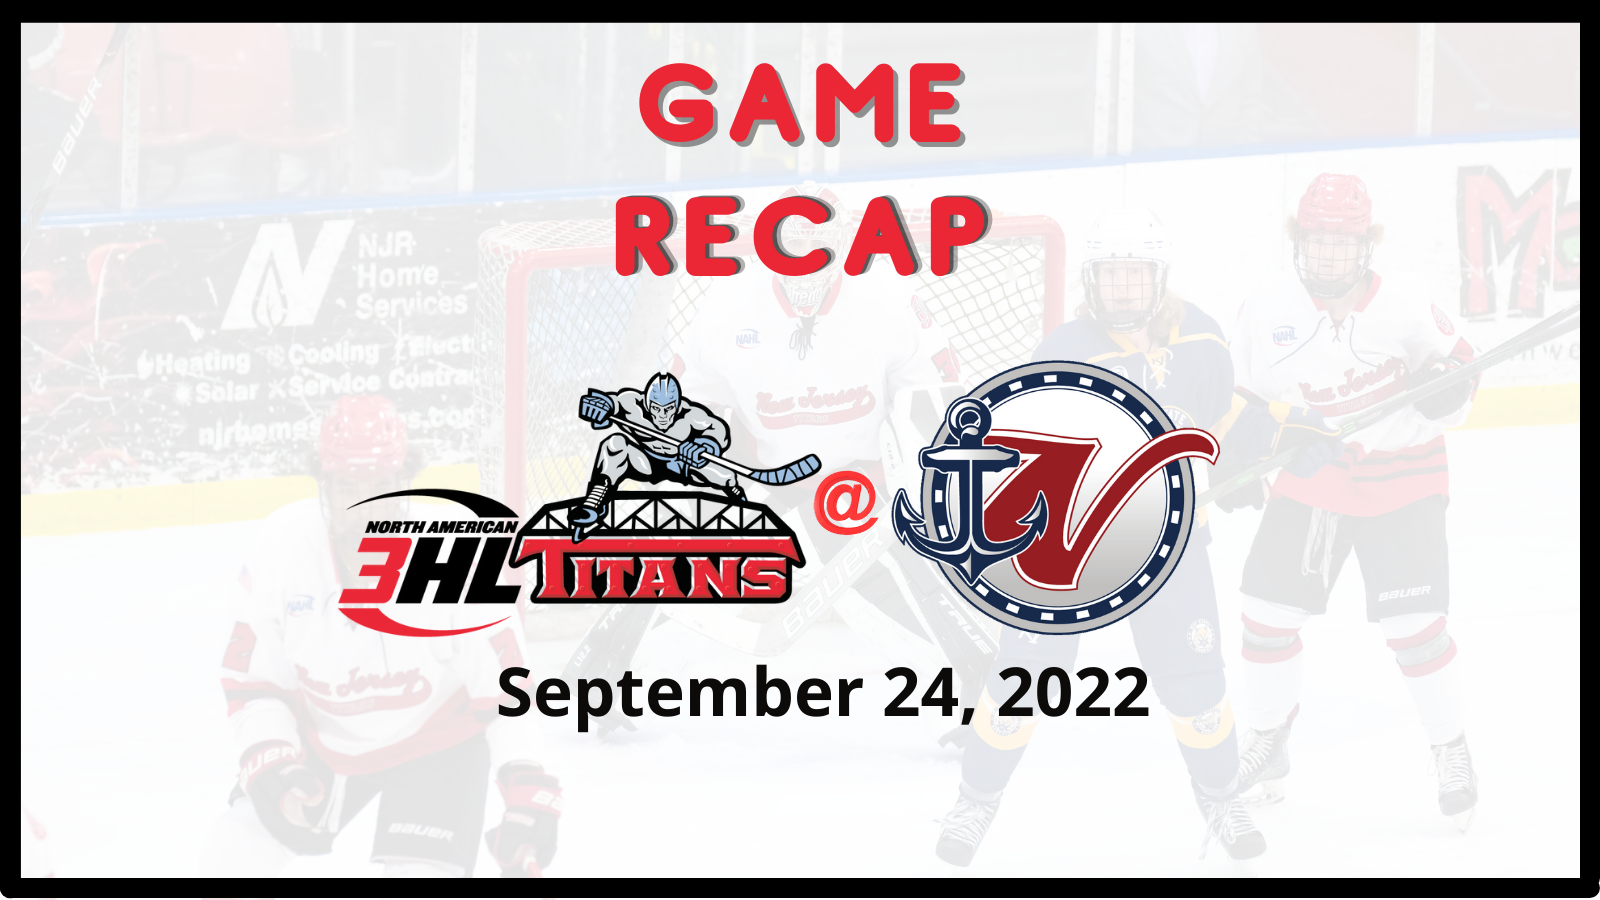 Sea Captains defeat Titans 4 – 1 to complete weekend sweep